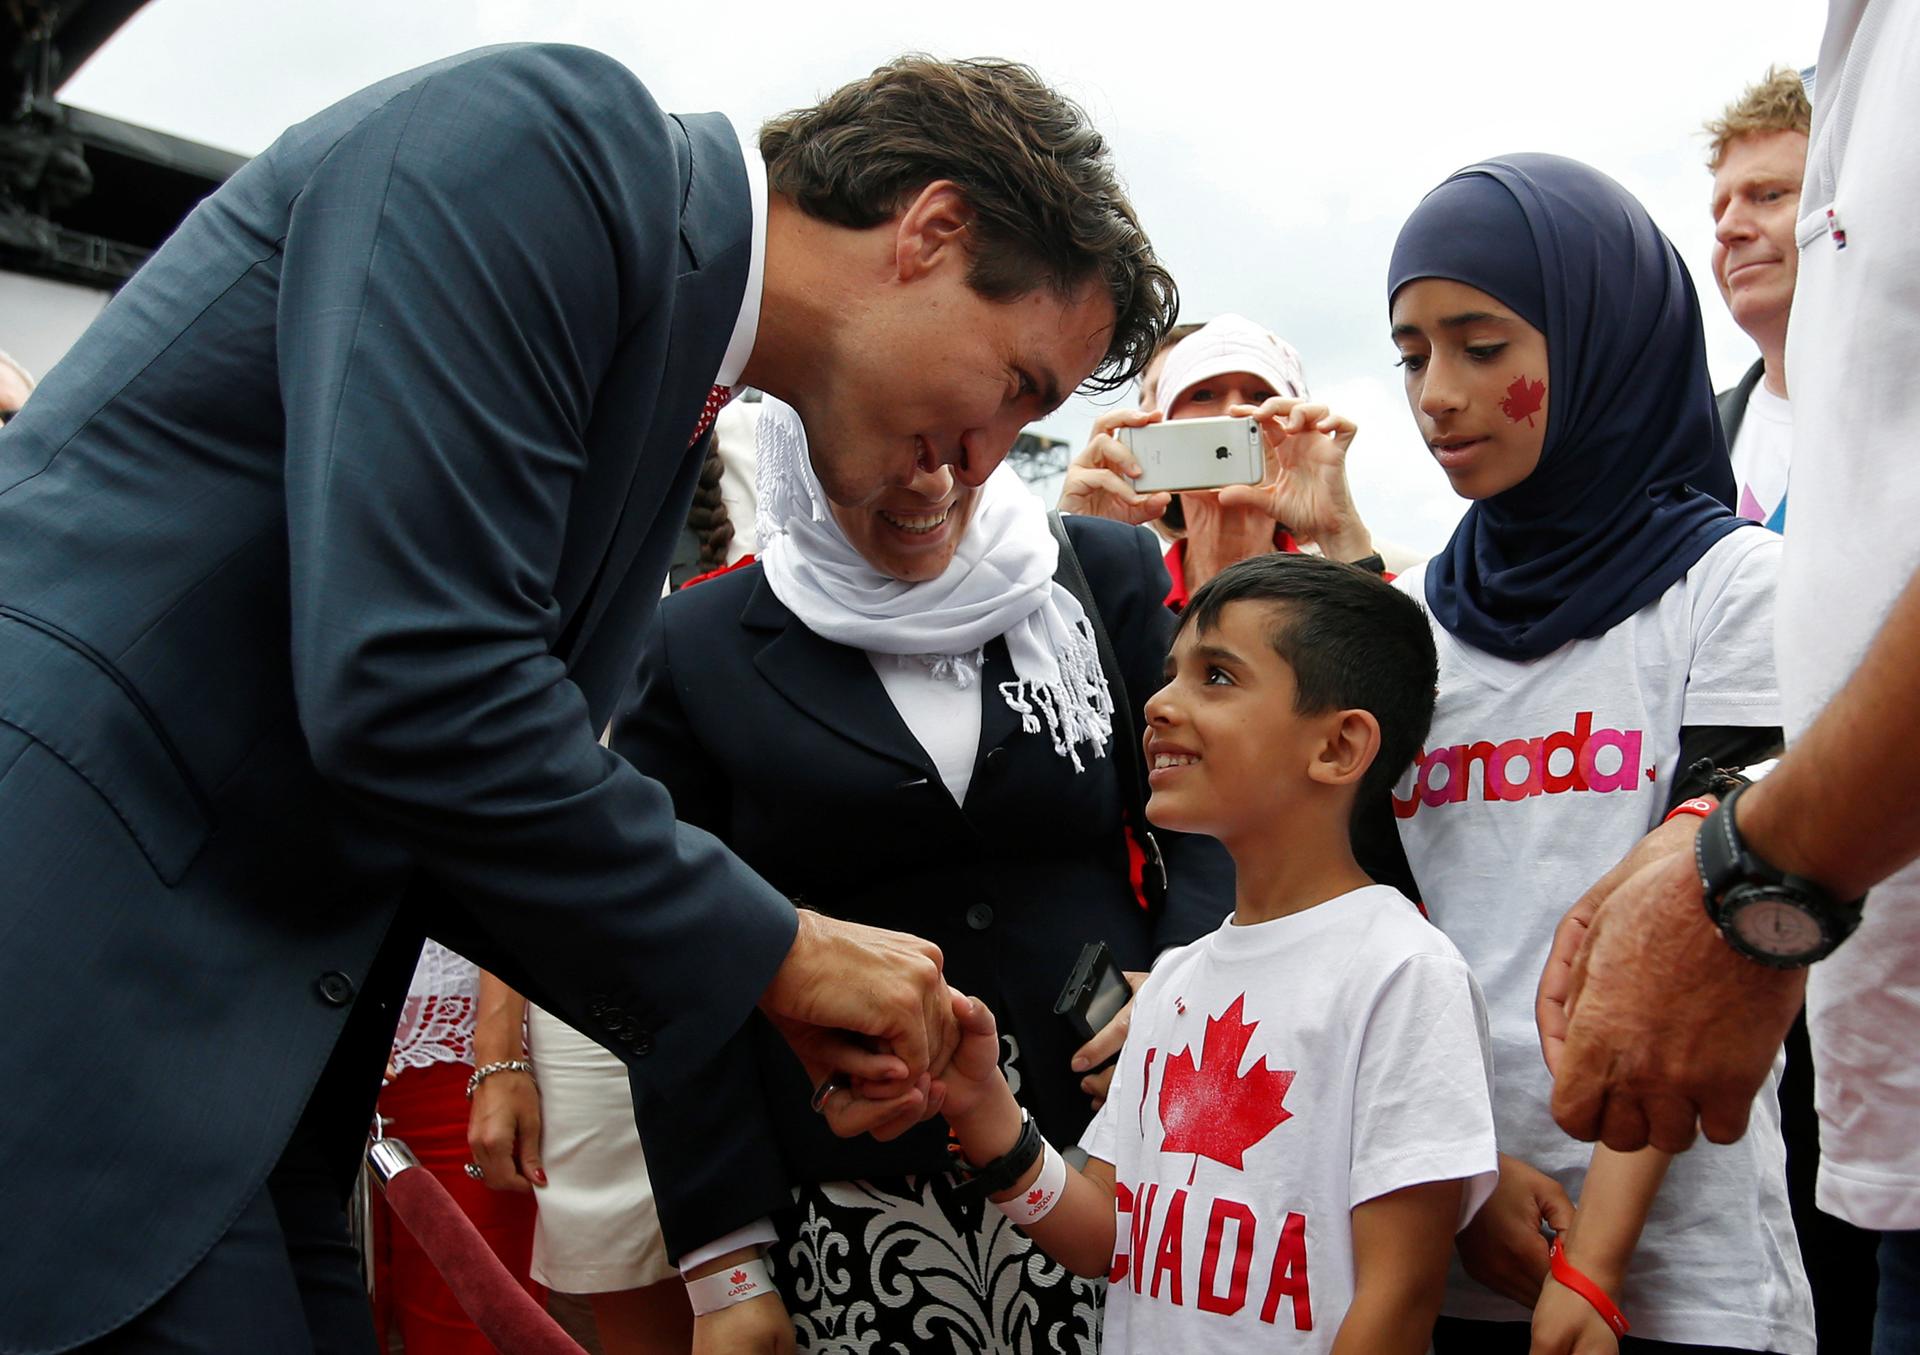 Canada's Prime Minister Justin Trudeau shakes hands with a Syrian refugee during Canada Day celebrations on Parliament Hill in Ottawa, Ontario, Canada, July 1, 2016.